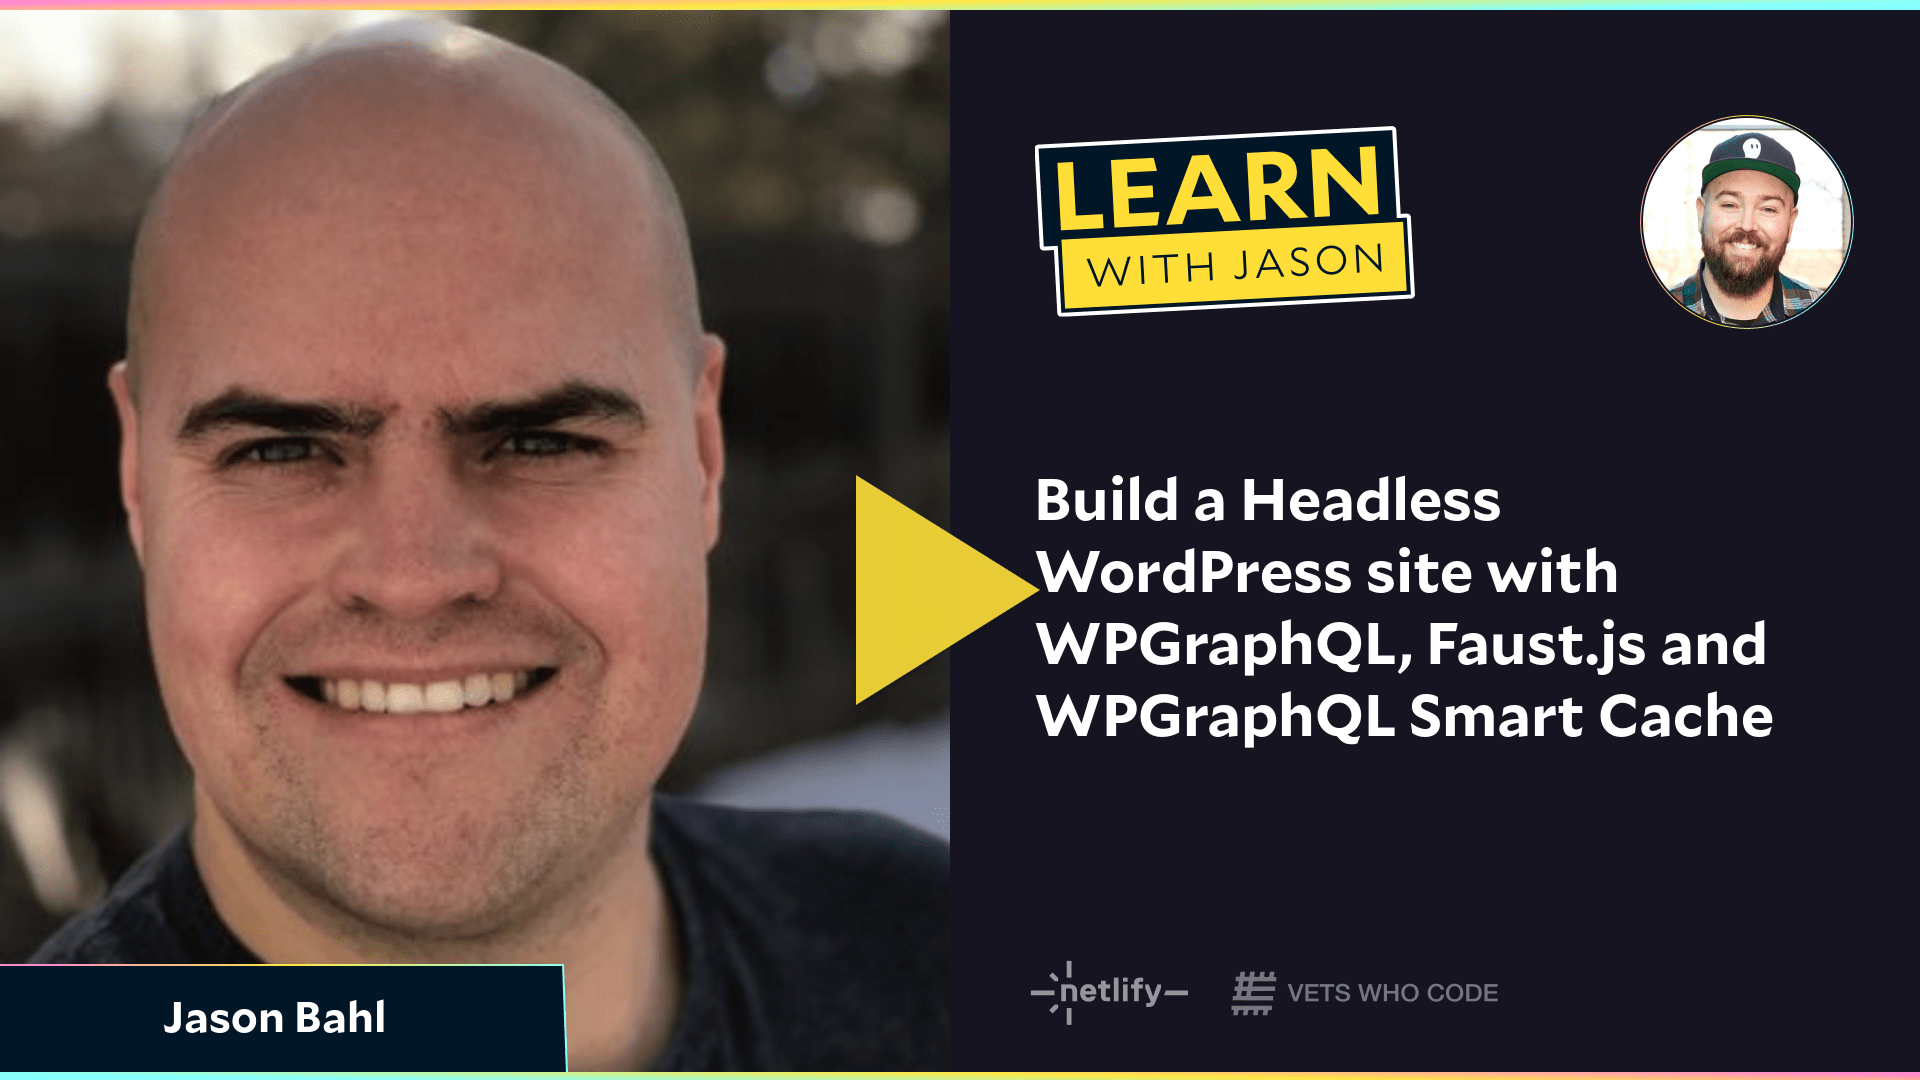 Build a Headless WordPress site with WPGraphQL, Faust.js and WPGraphQL Smart Cache (with Jason Bahl)